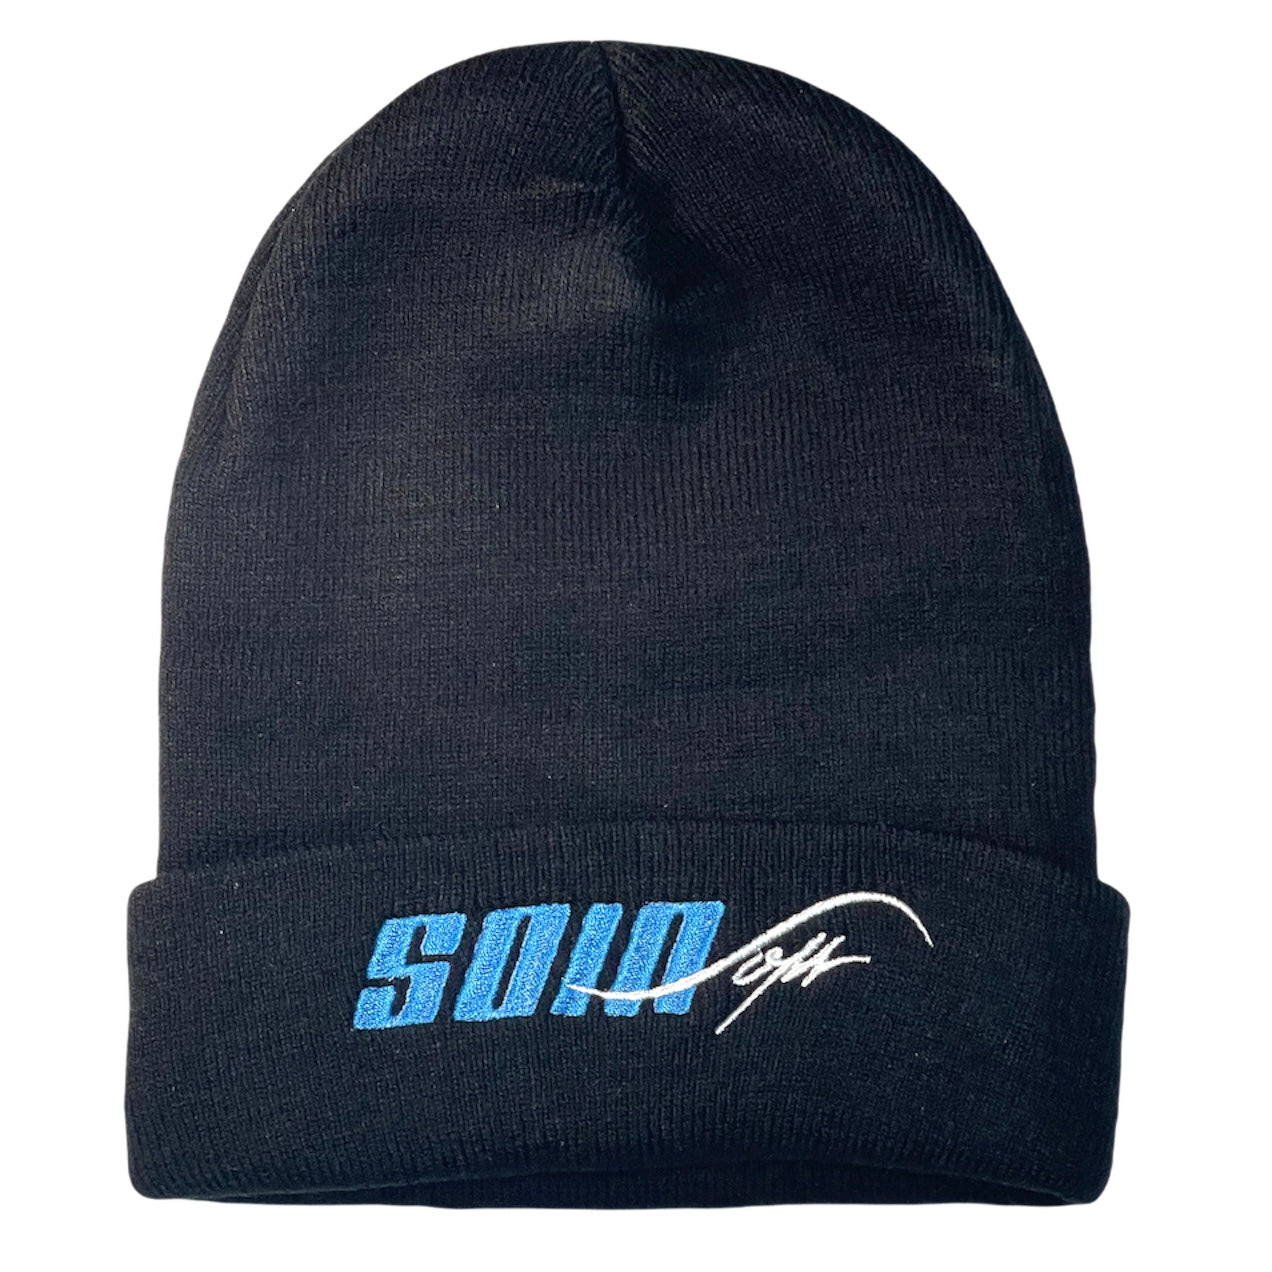 Black Cold Blue (limited edition)